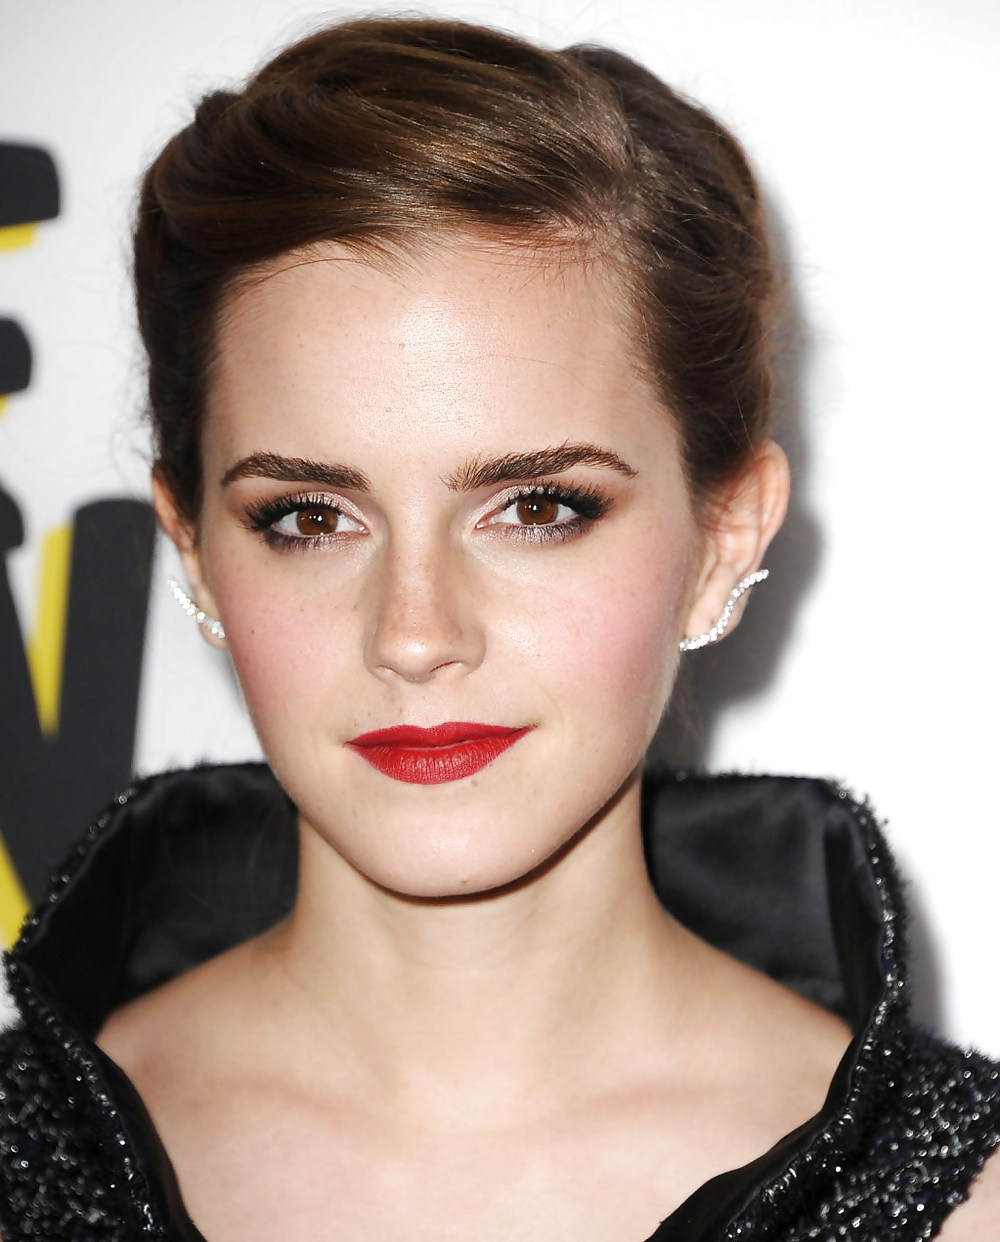 Most beautiful emma watson pic and face ever! #17724416